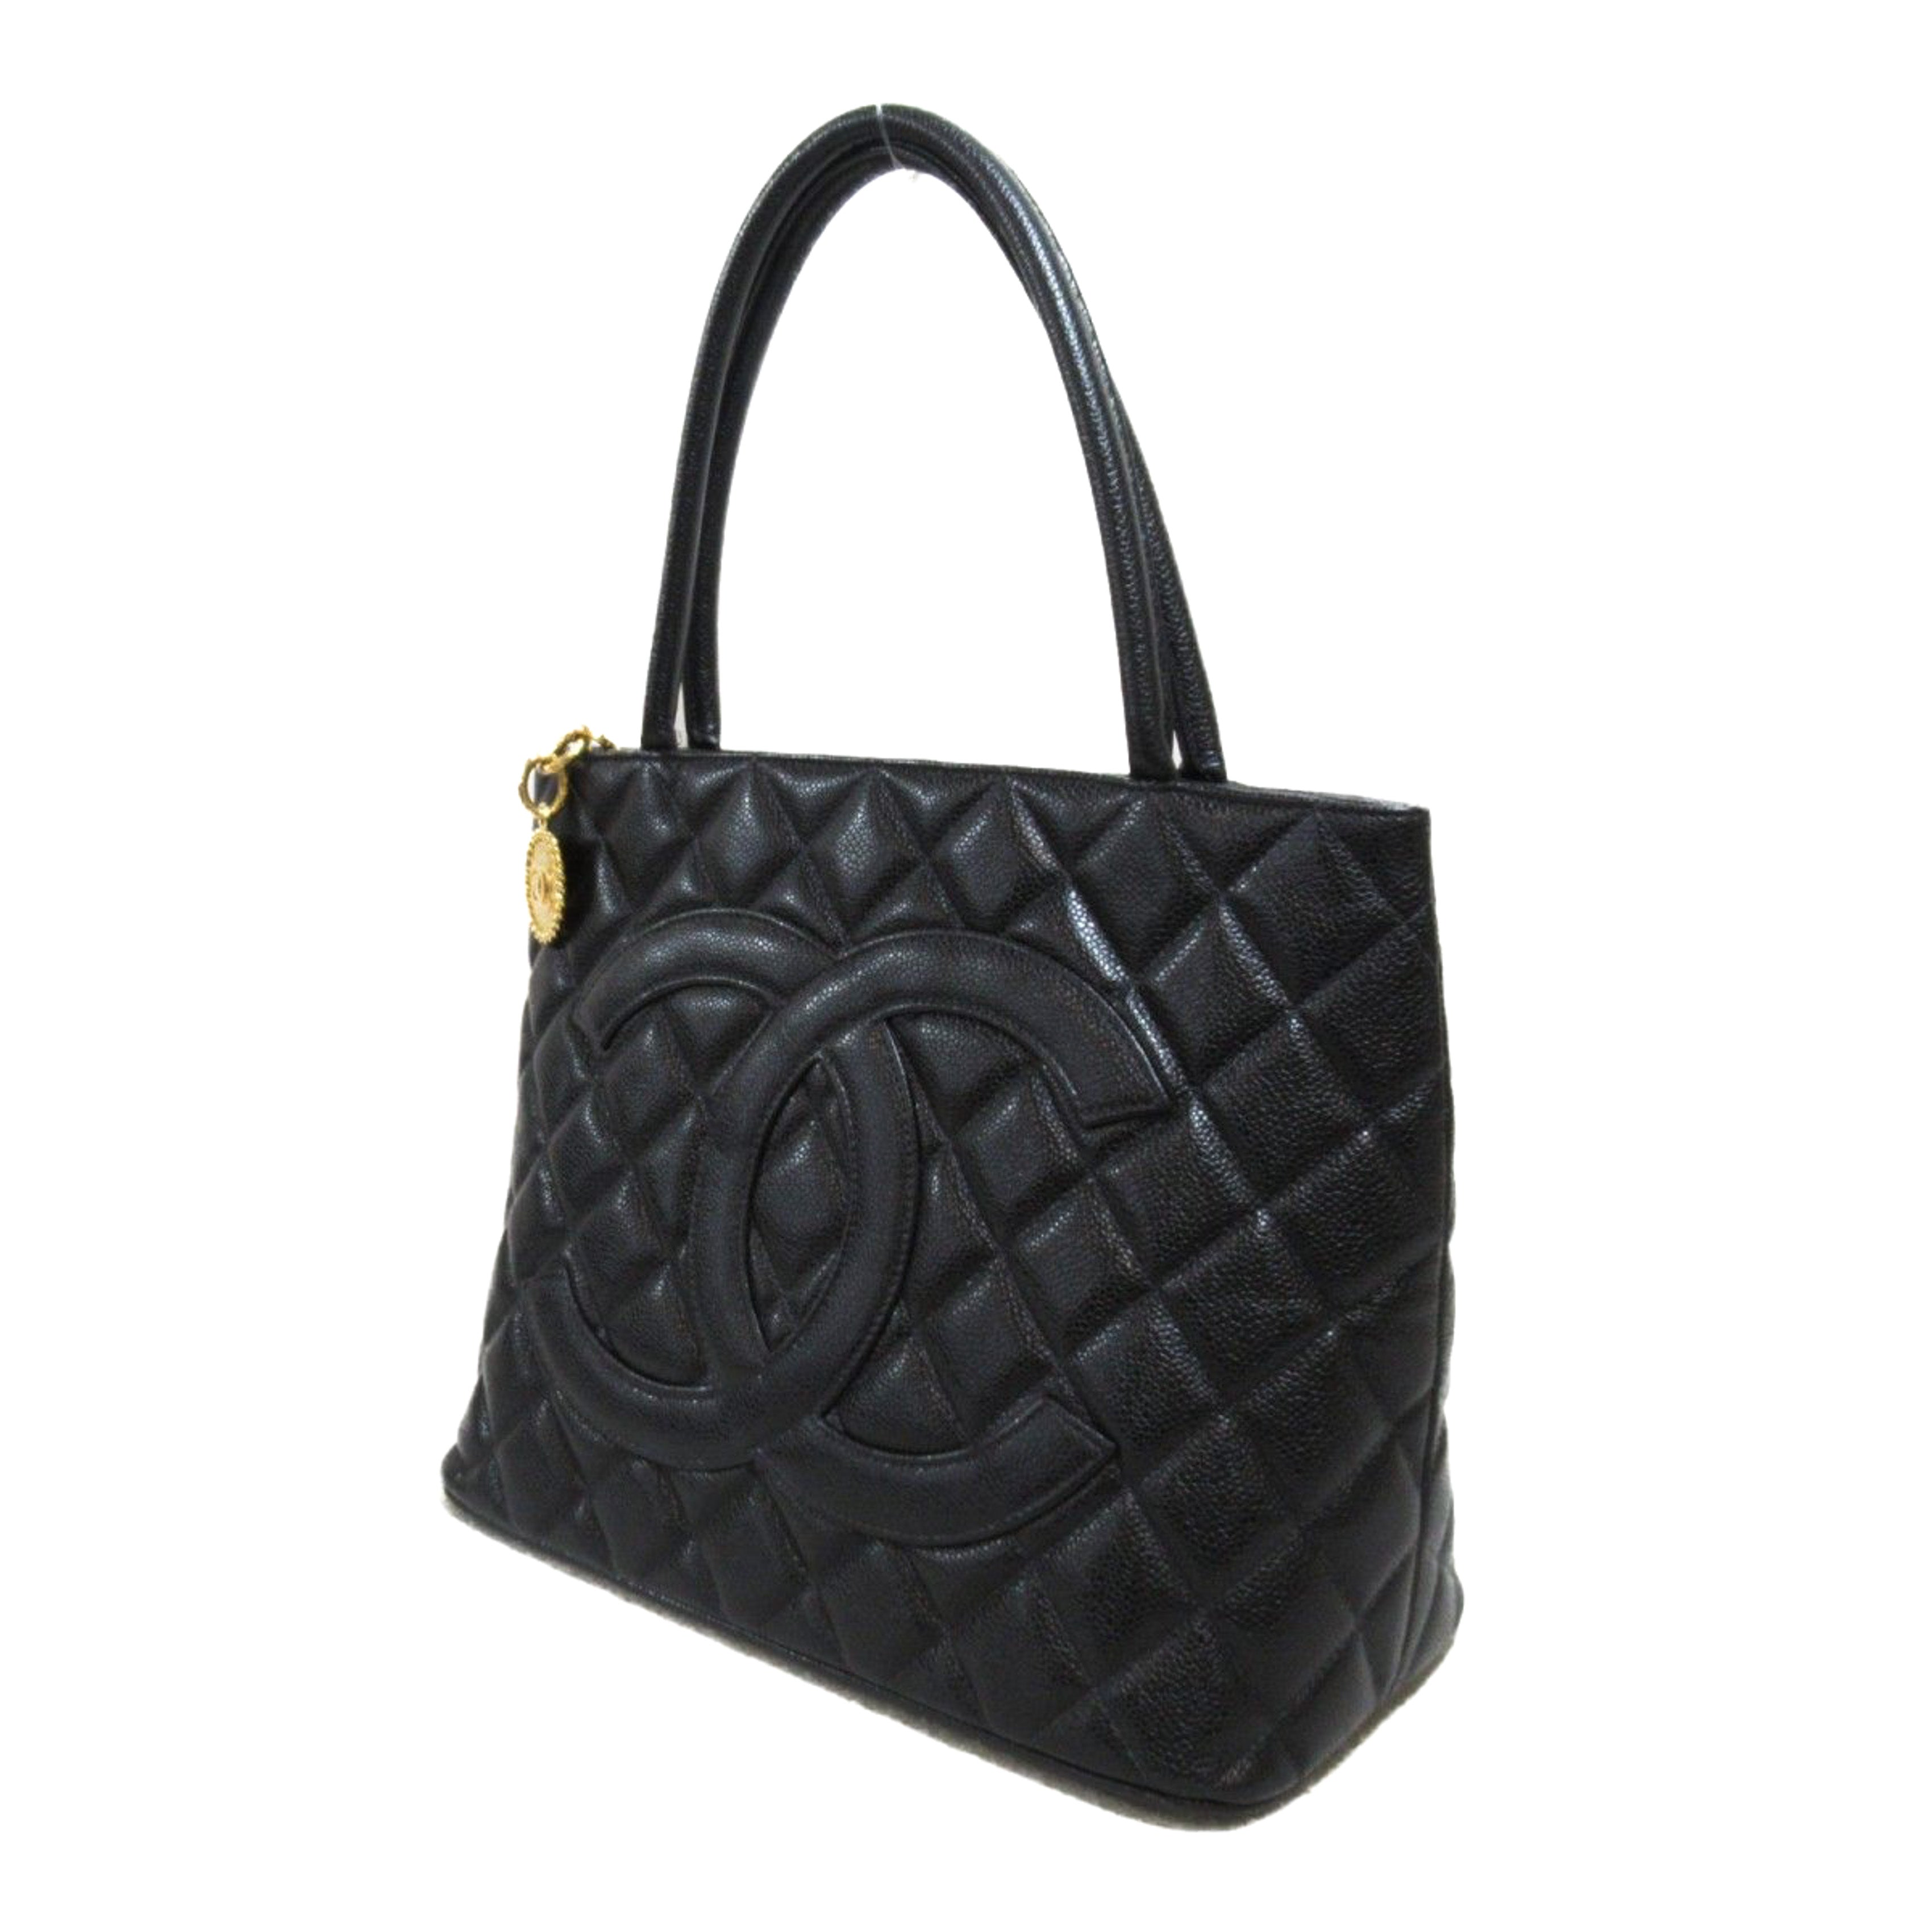 CHANEL Chanel Caviar Medallion Tote with Gold Hardware - Vault 55